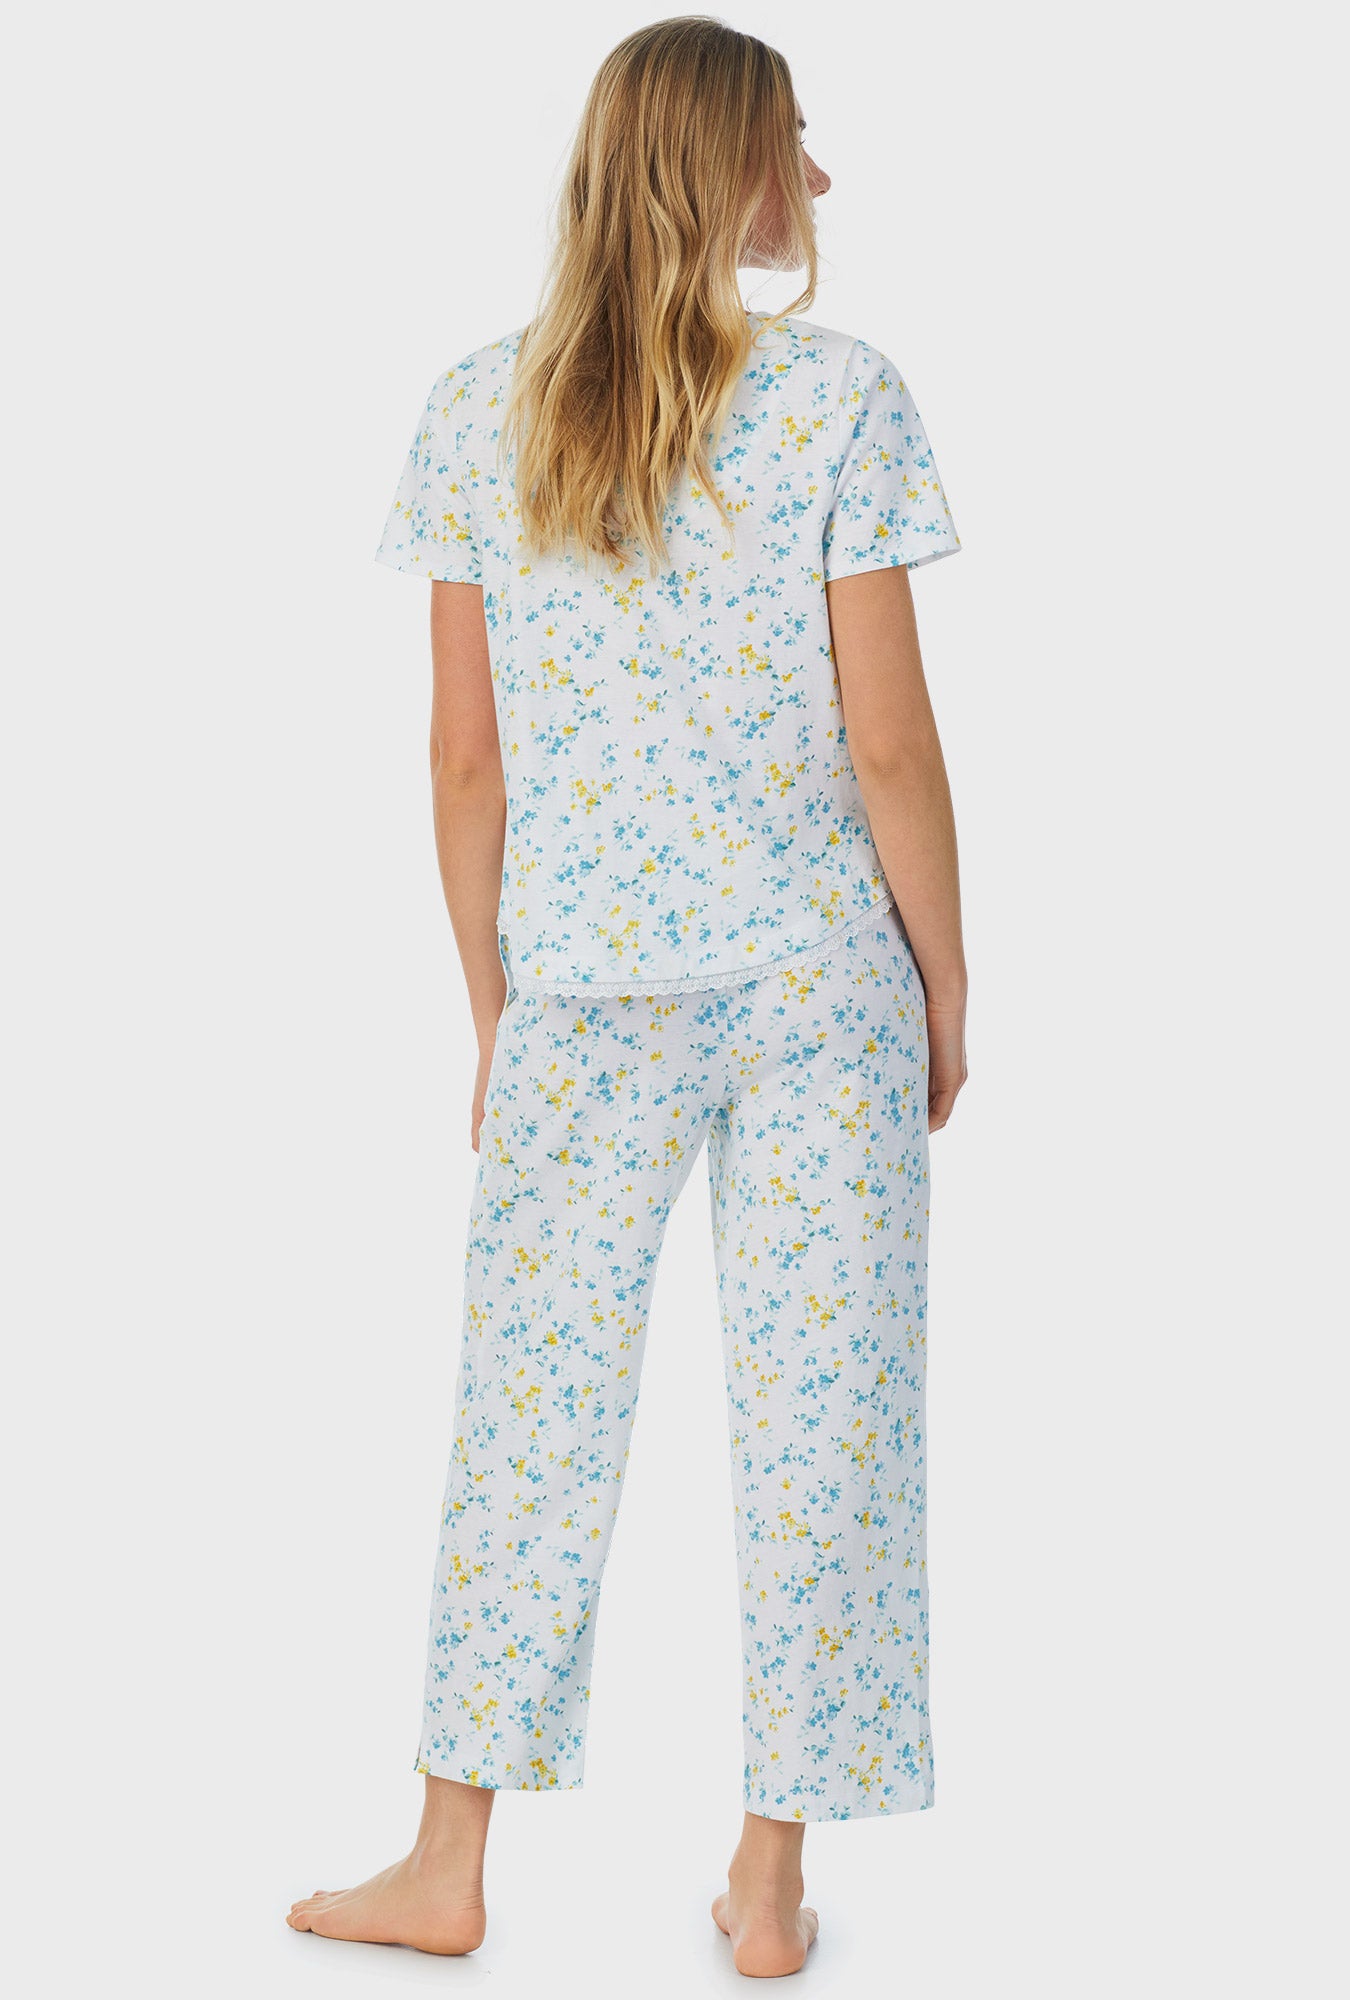 A lady wearing white short sleeve capri pajama set with breeze blooms.